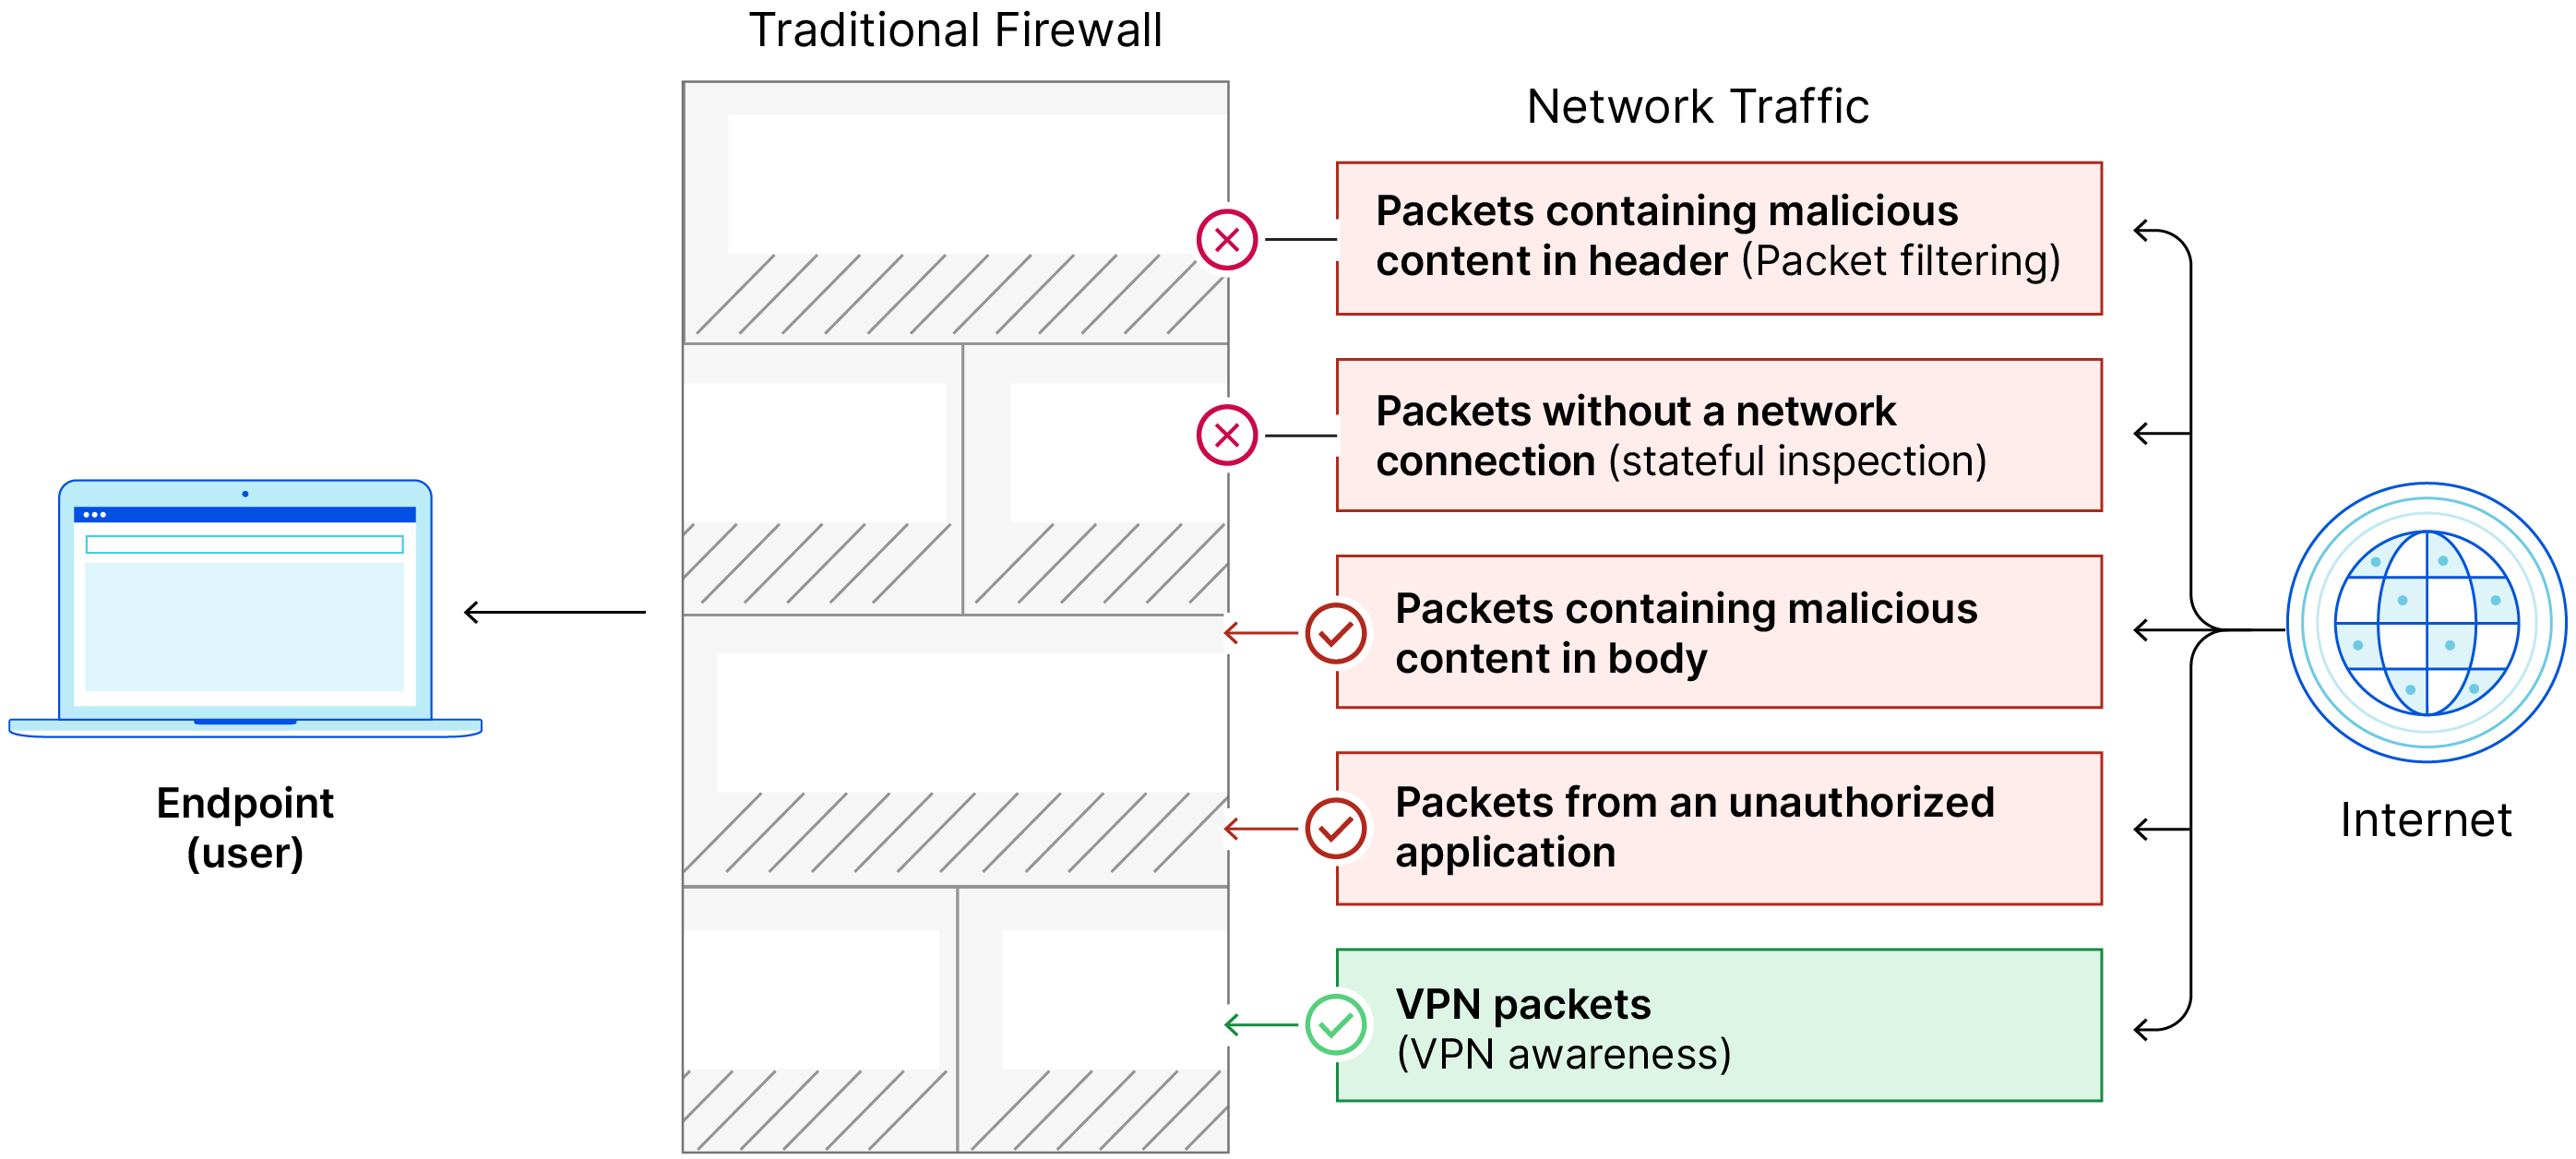 Traditional firewall lacks next generation firewall NGFW capabilities, lets packets through